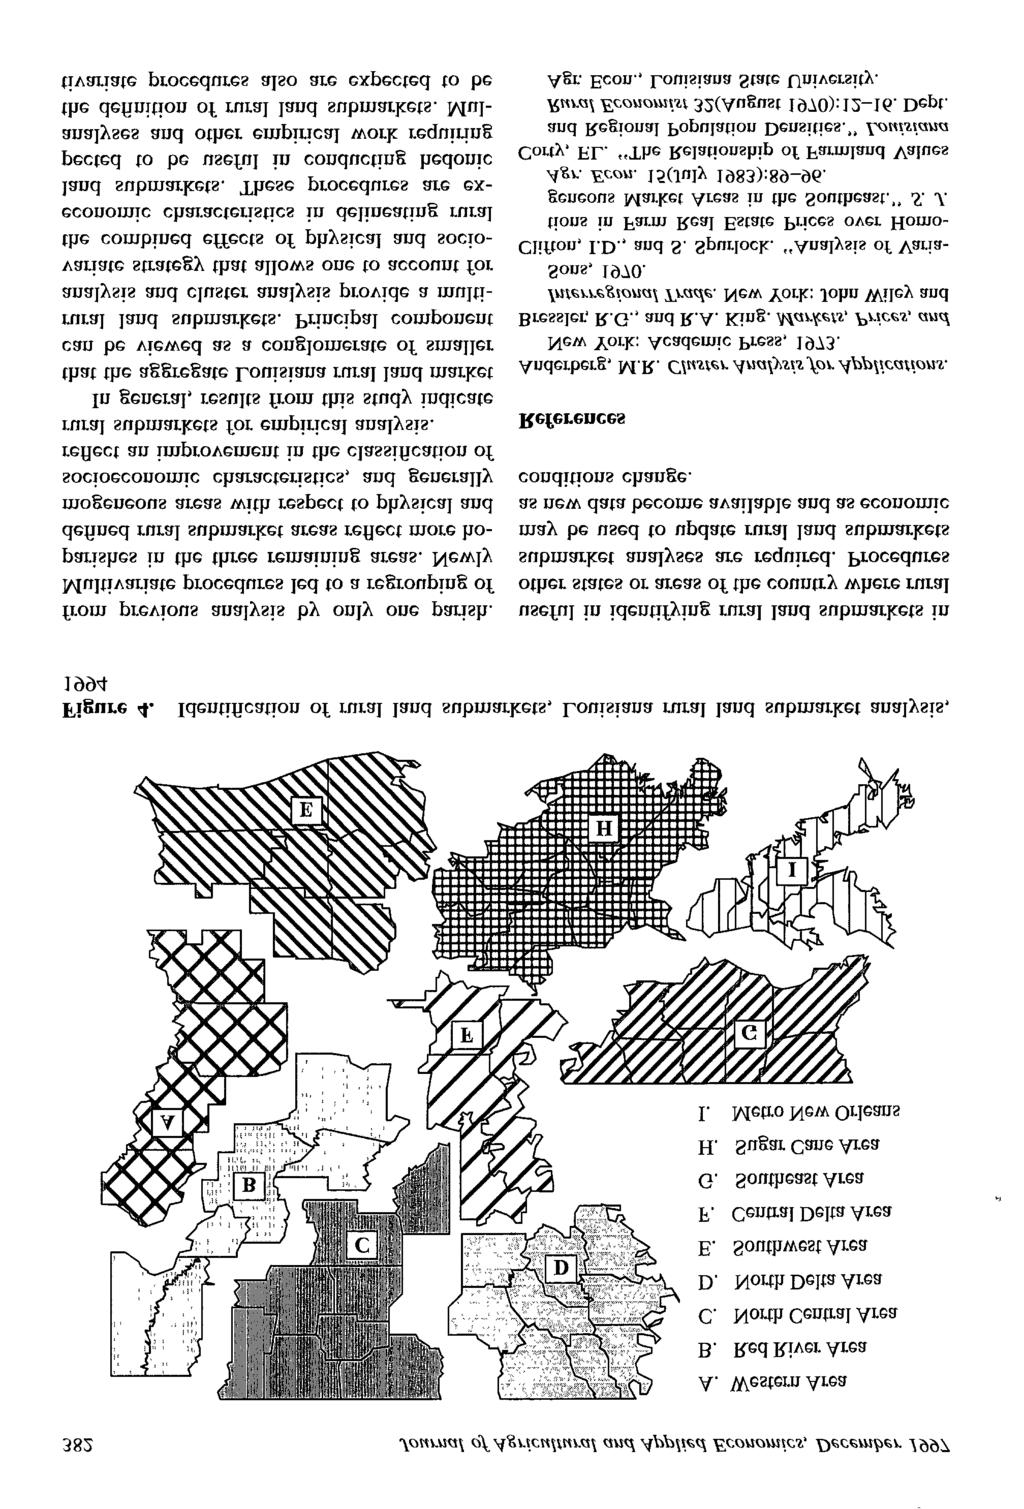 382 Journal of Agricultural and Applied Economics, December 1997 A. Western Area B. Red River Area C. North Central Area D, North Delta Area E. Southwest Area F.